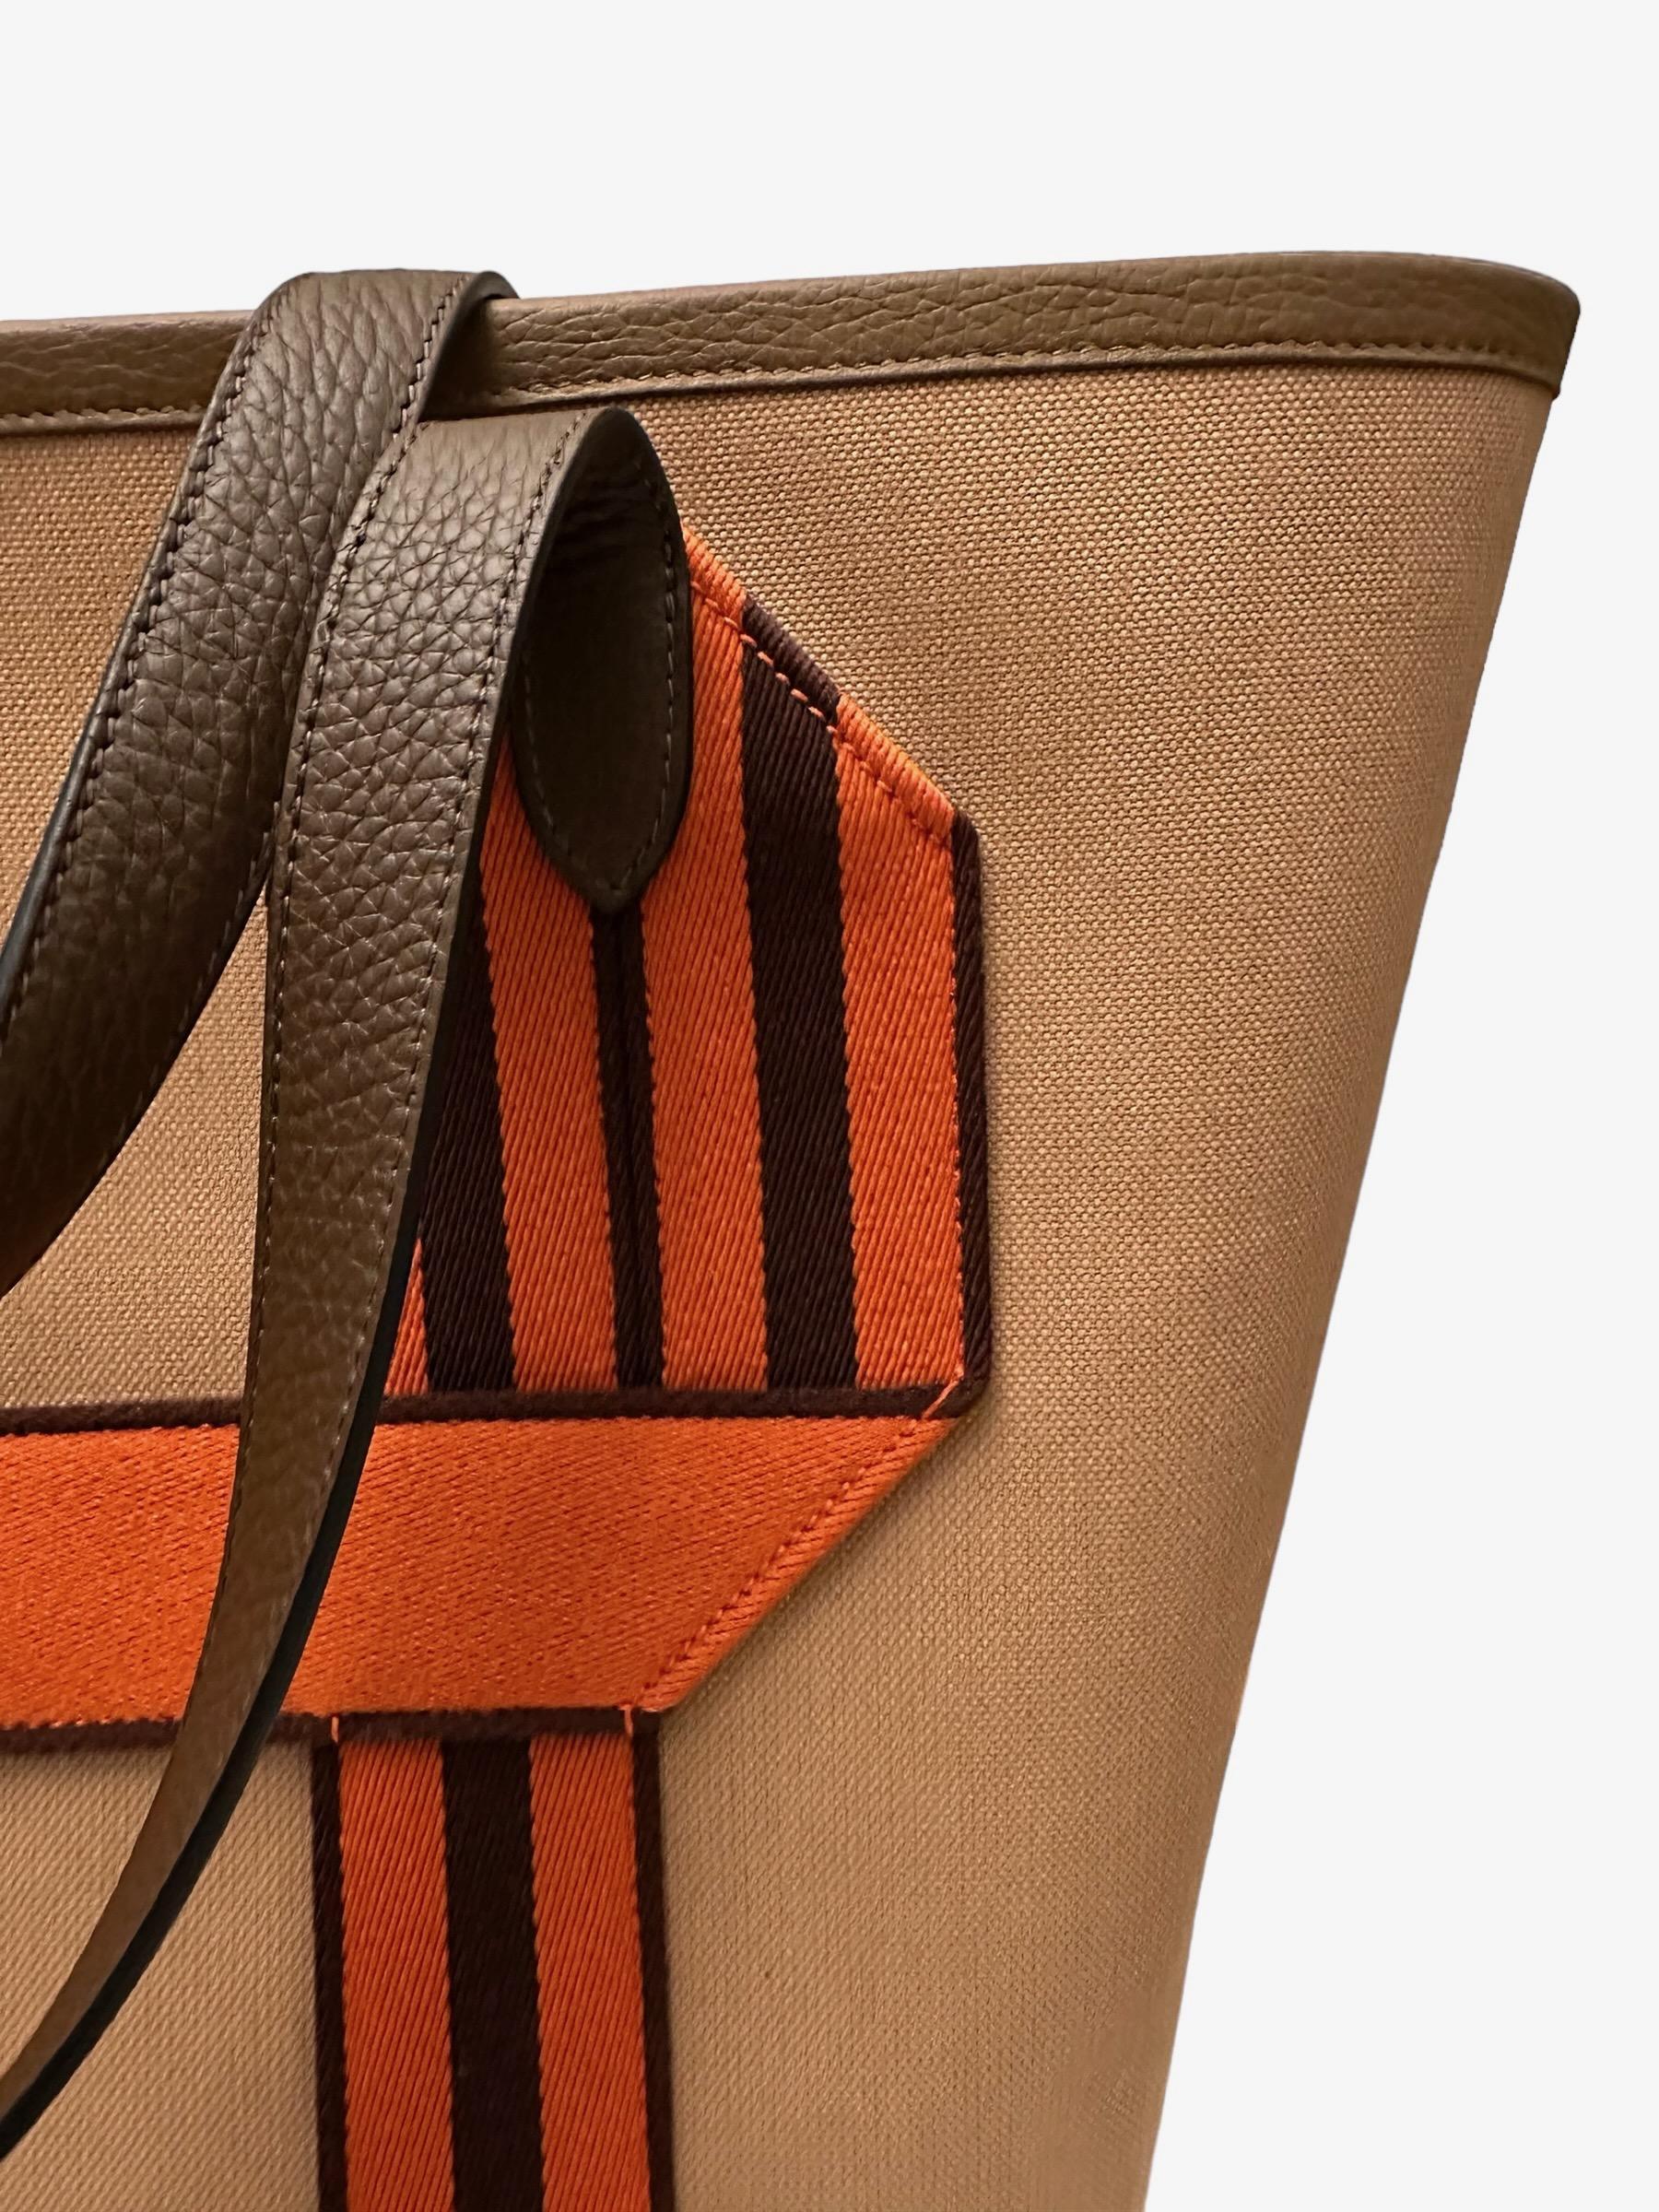 This pre-owned but new tote bag from the house of Hermès is crafted in military canvas, taurillon Clemence leather and Wooly canvas with handles. It features a large compartment, a zipped interior back pocket and a striped 